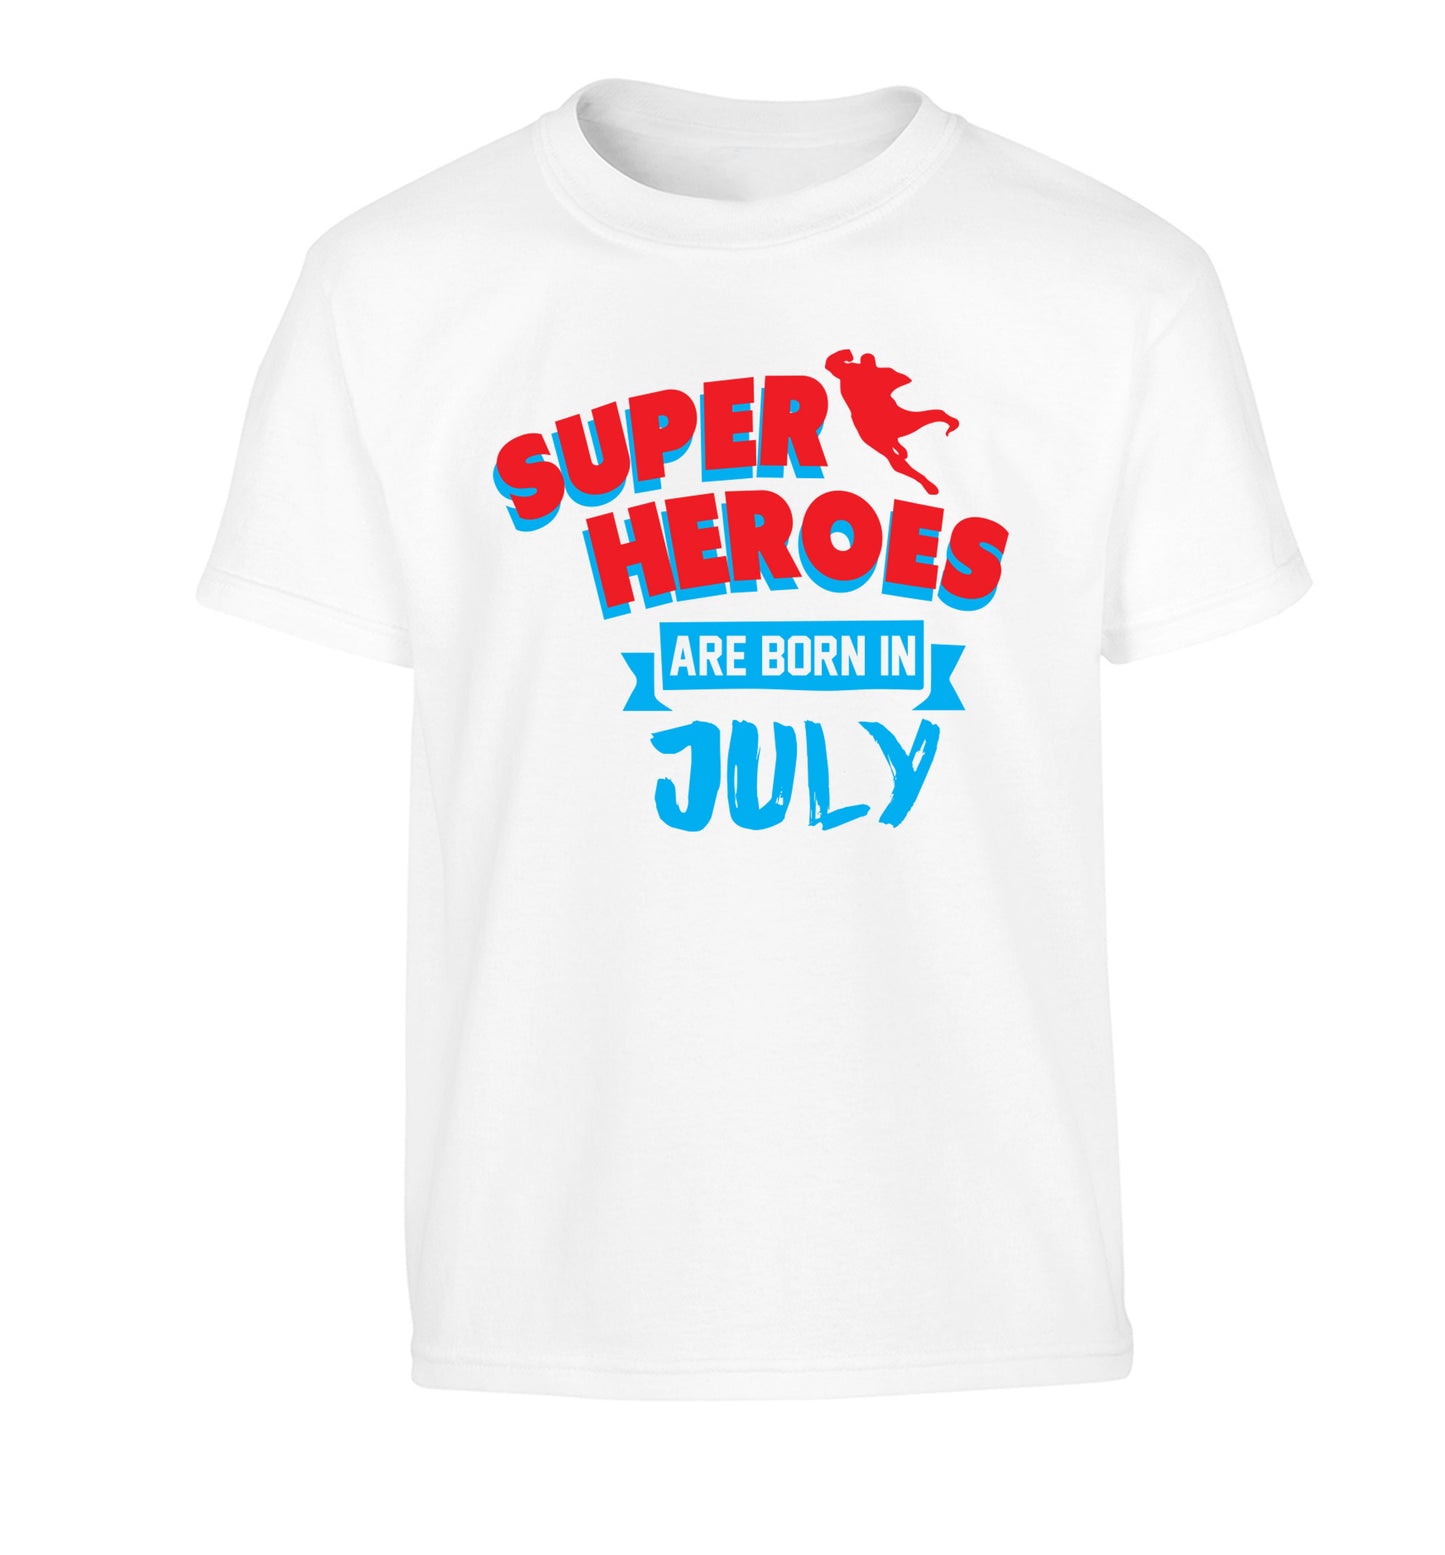 Superheroes are born in July Children's white Tshirt 12-13 Years